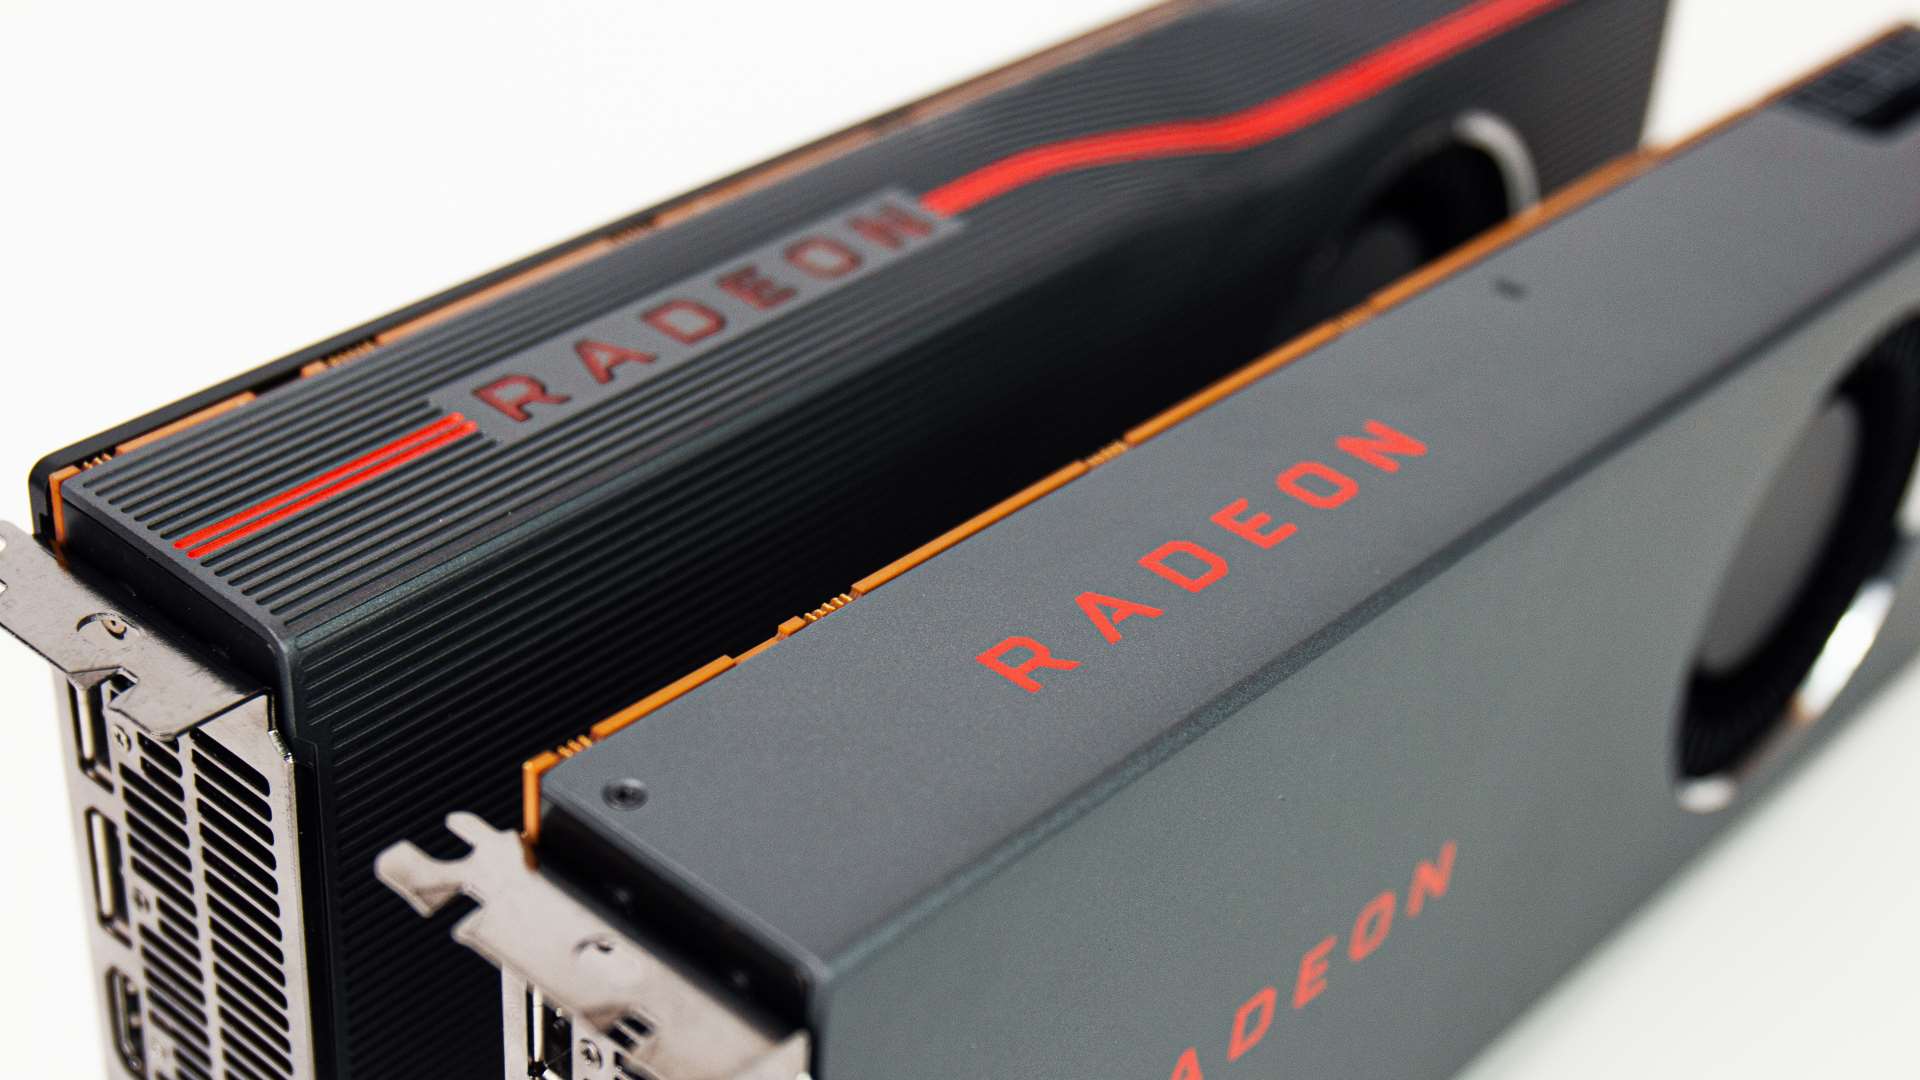 AMD's RX 5700 cards ditched CrossFire 